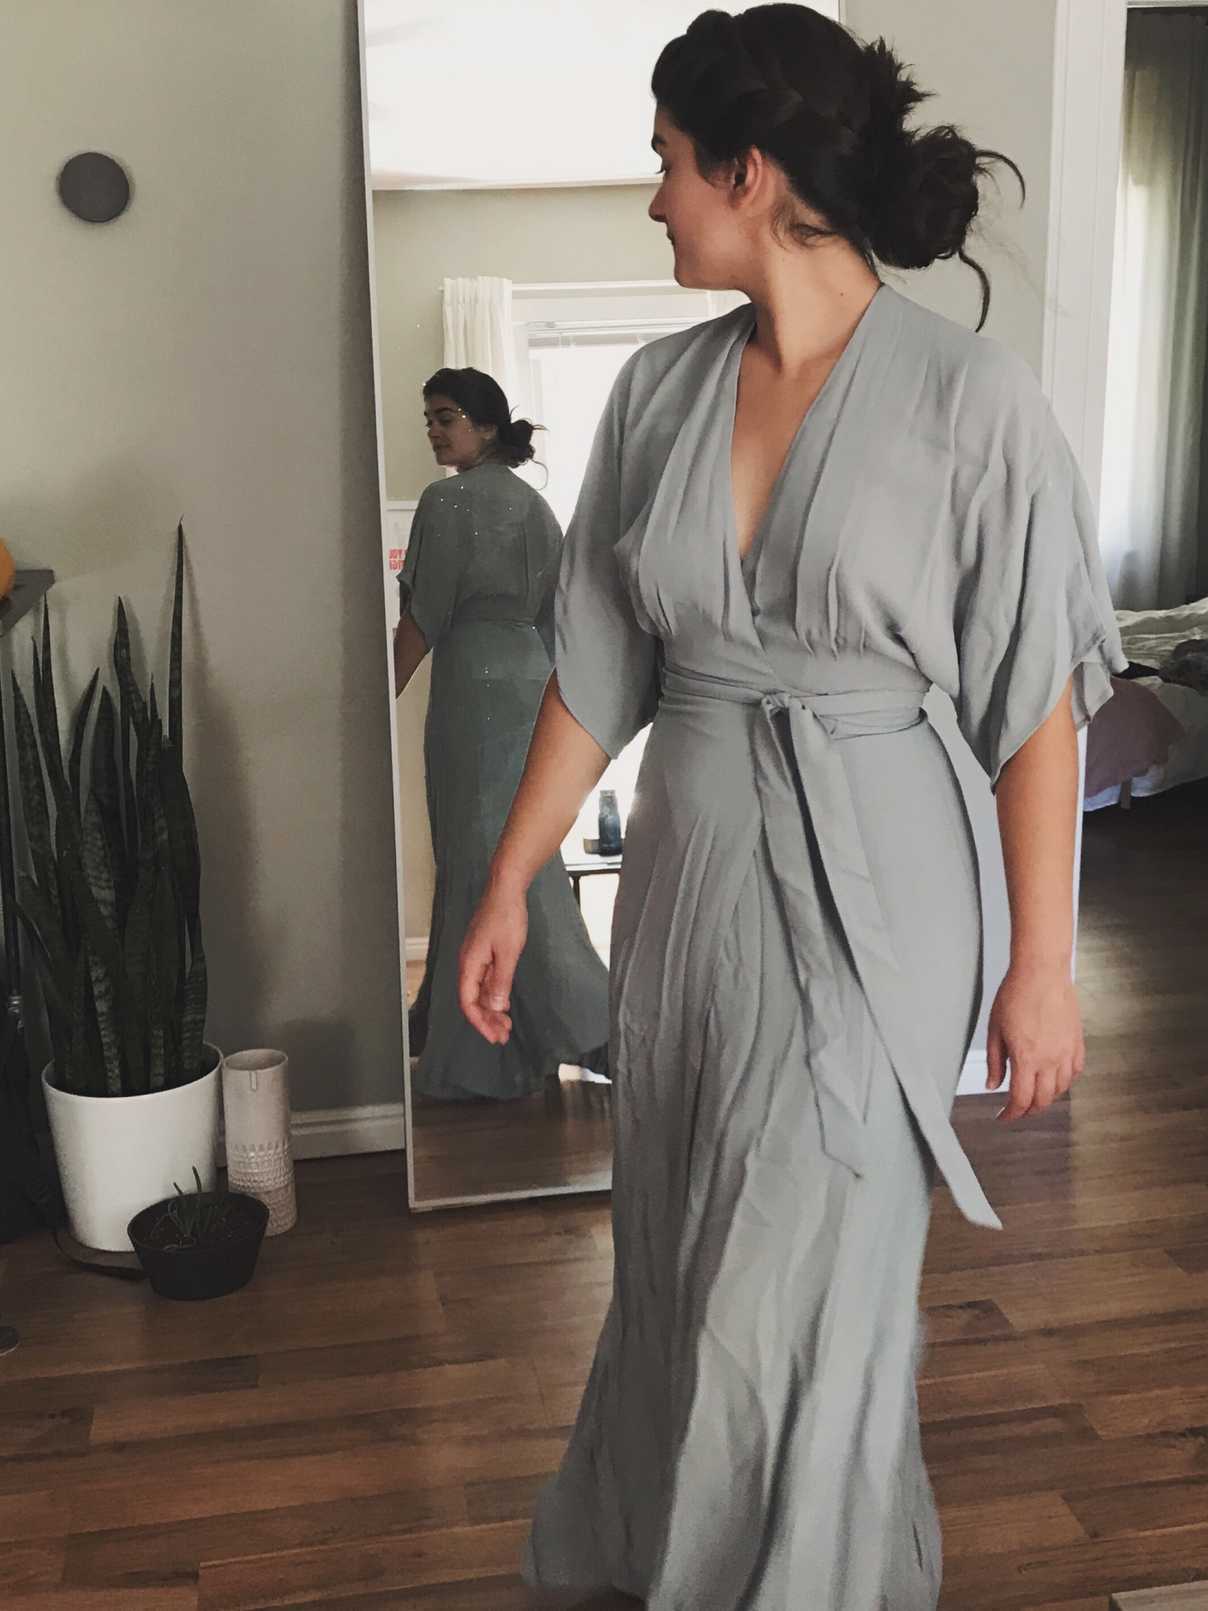 Sara posing in front of mirror with dusty blue kimono-style wrap dress